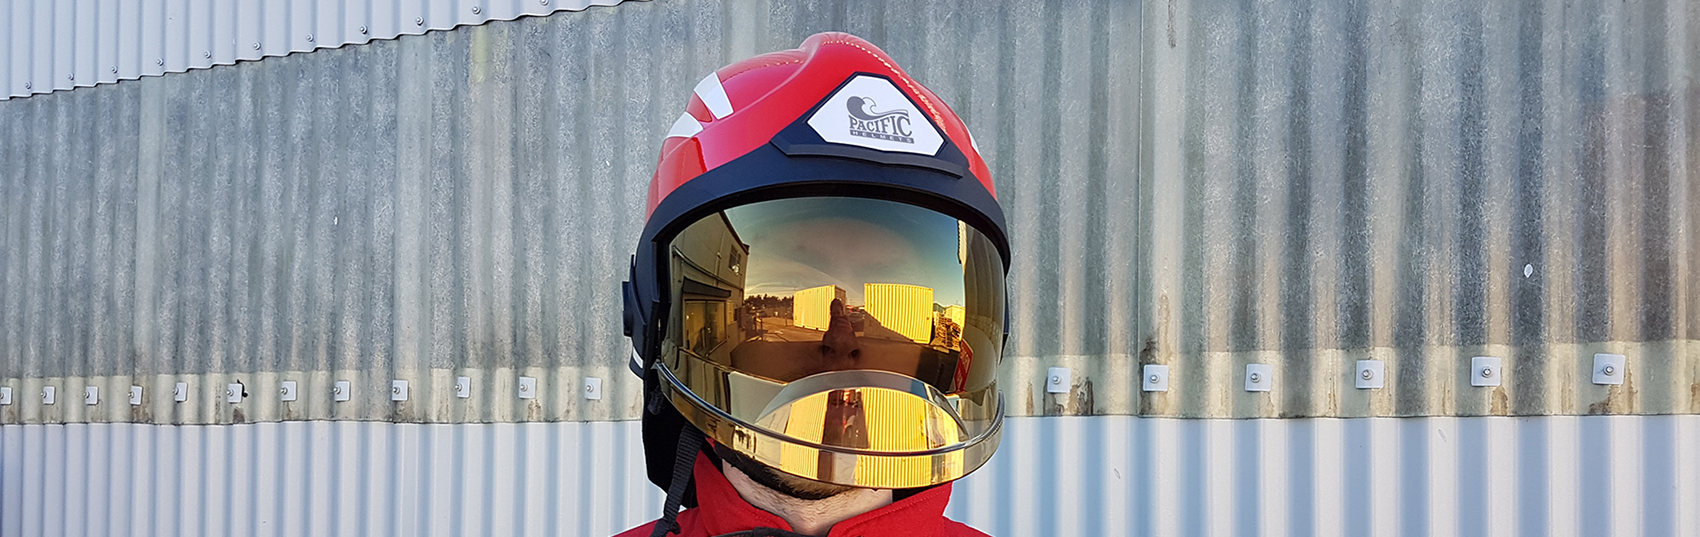 Business Success Story: Pacific Helmets